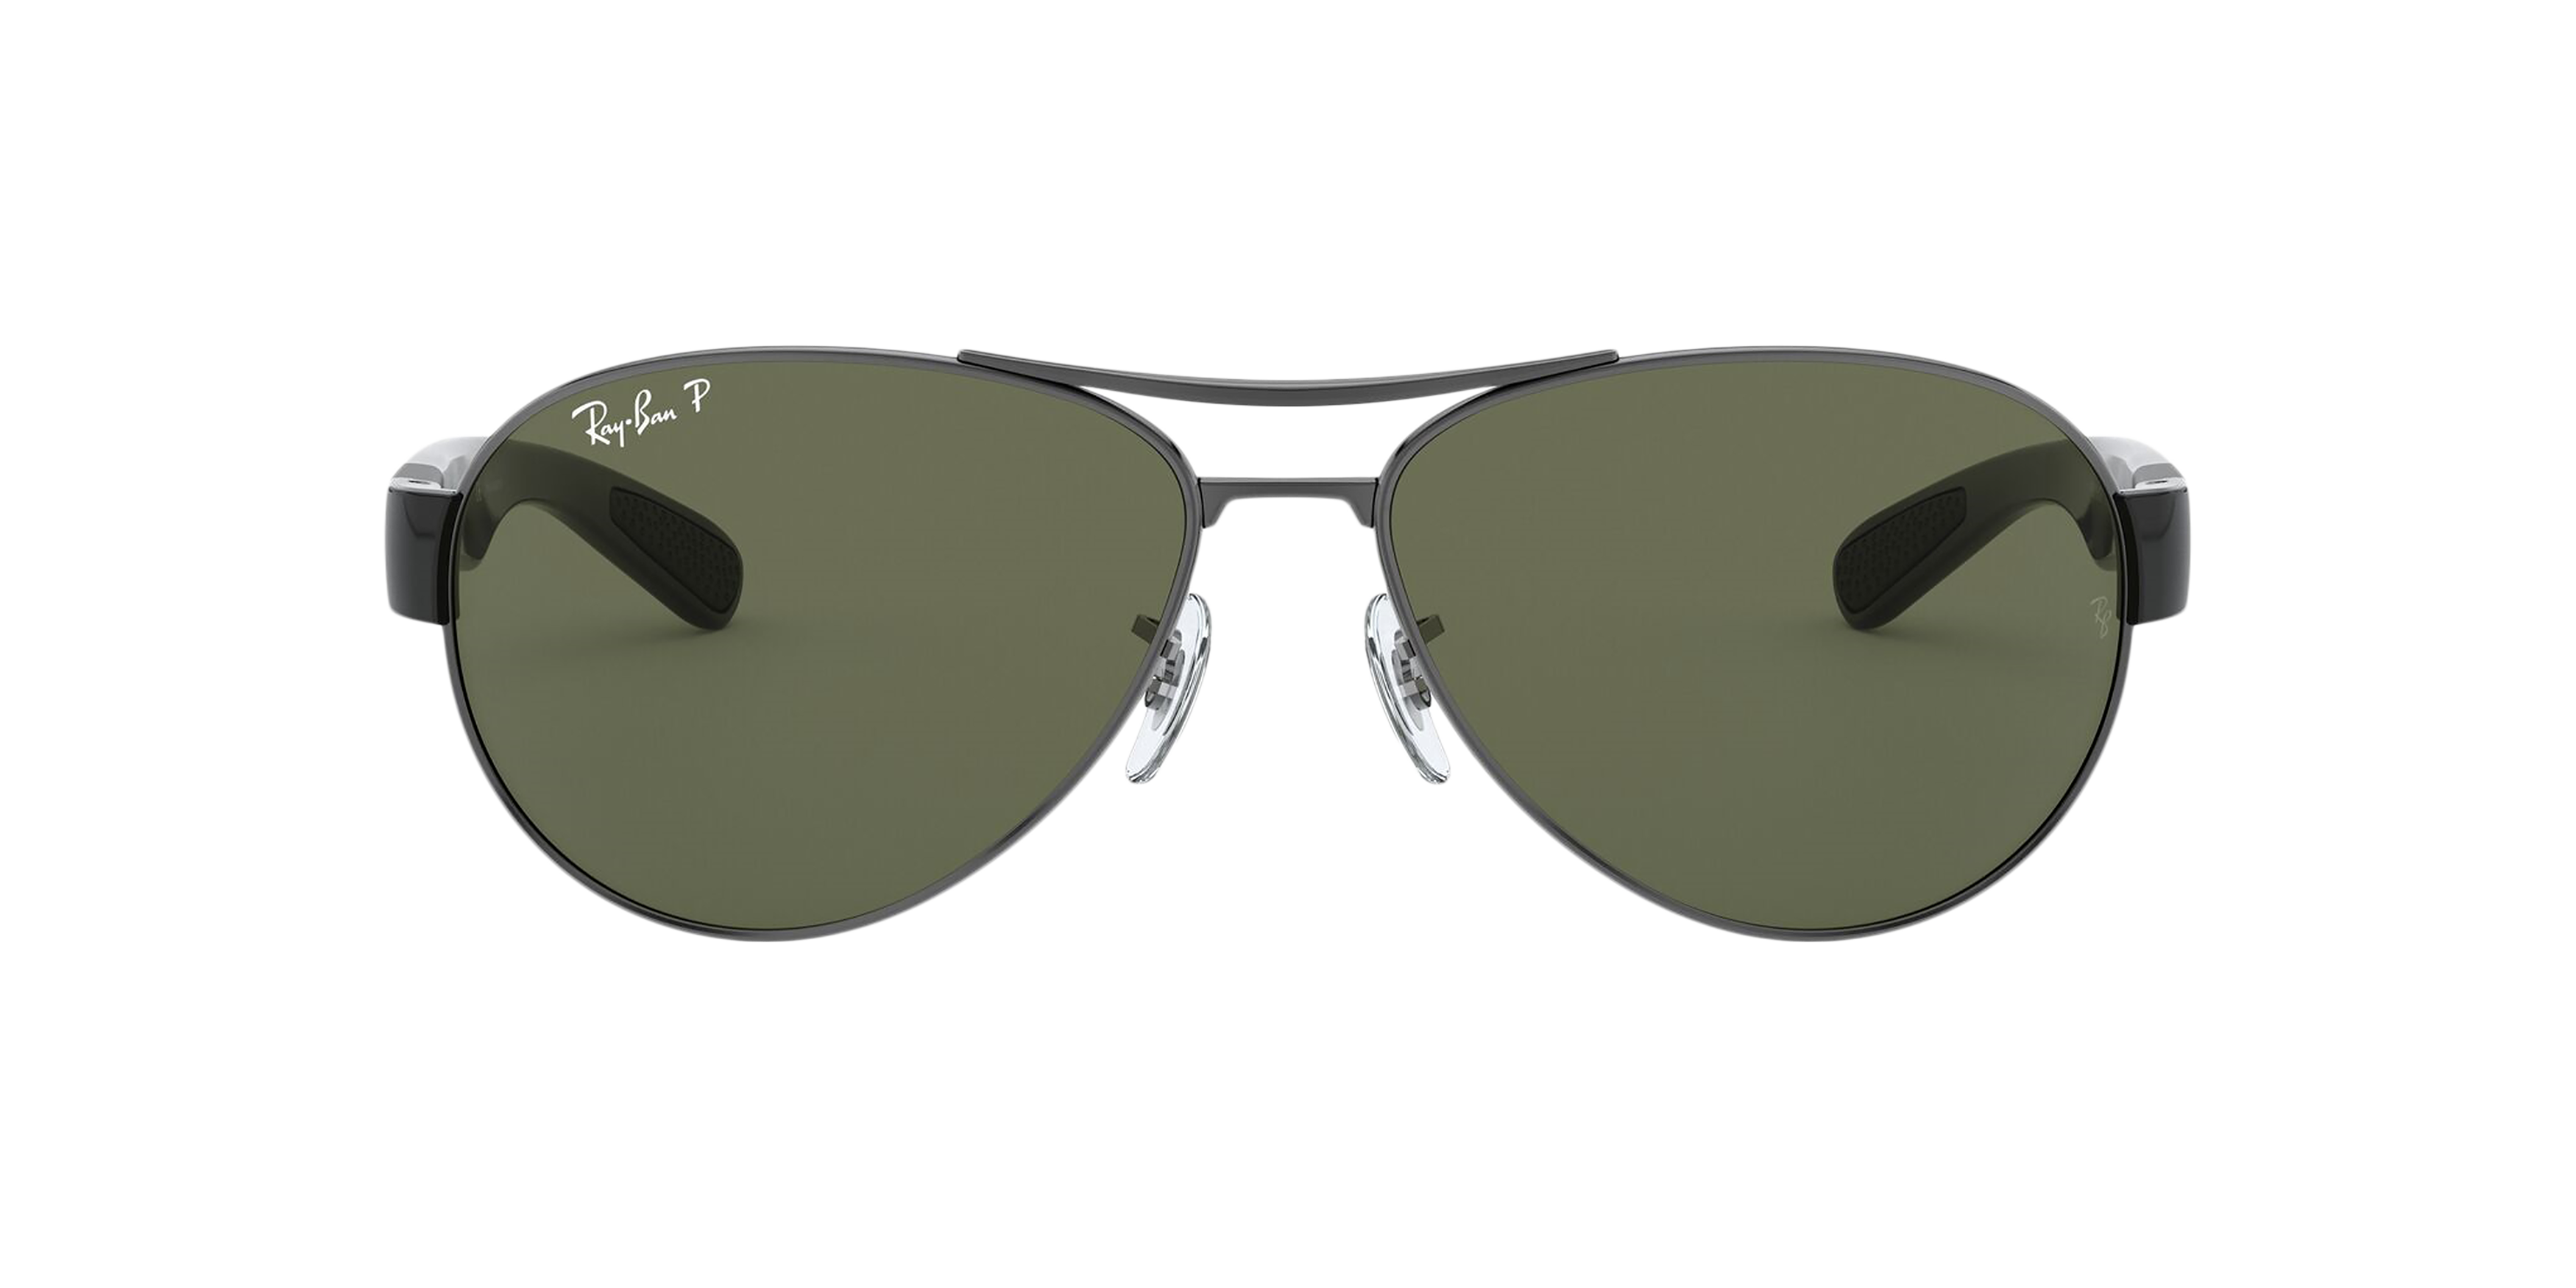 [products.image.front] Ray-Ban RB3509 004/9A